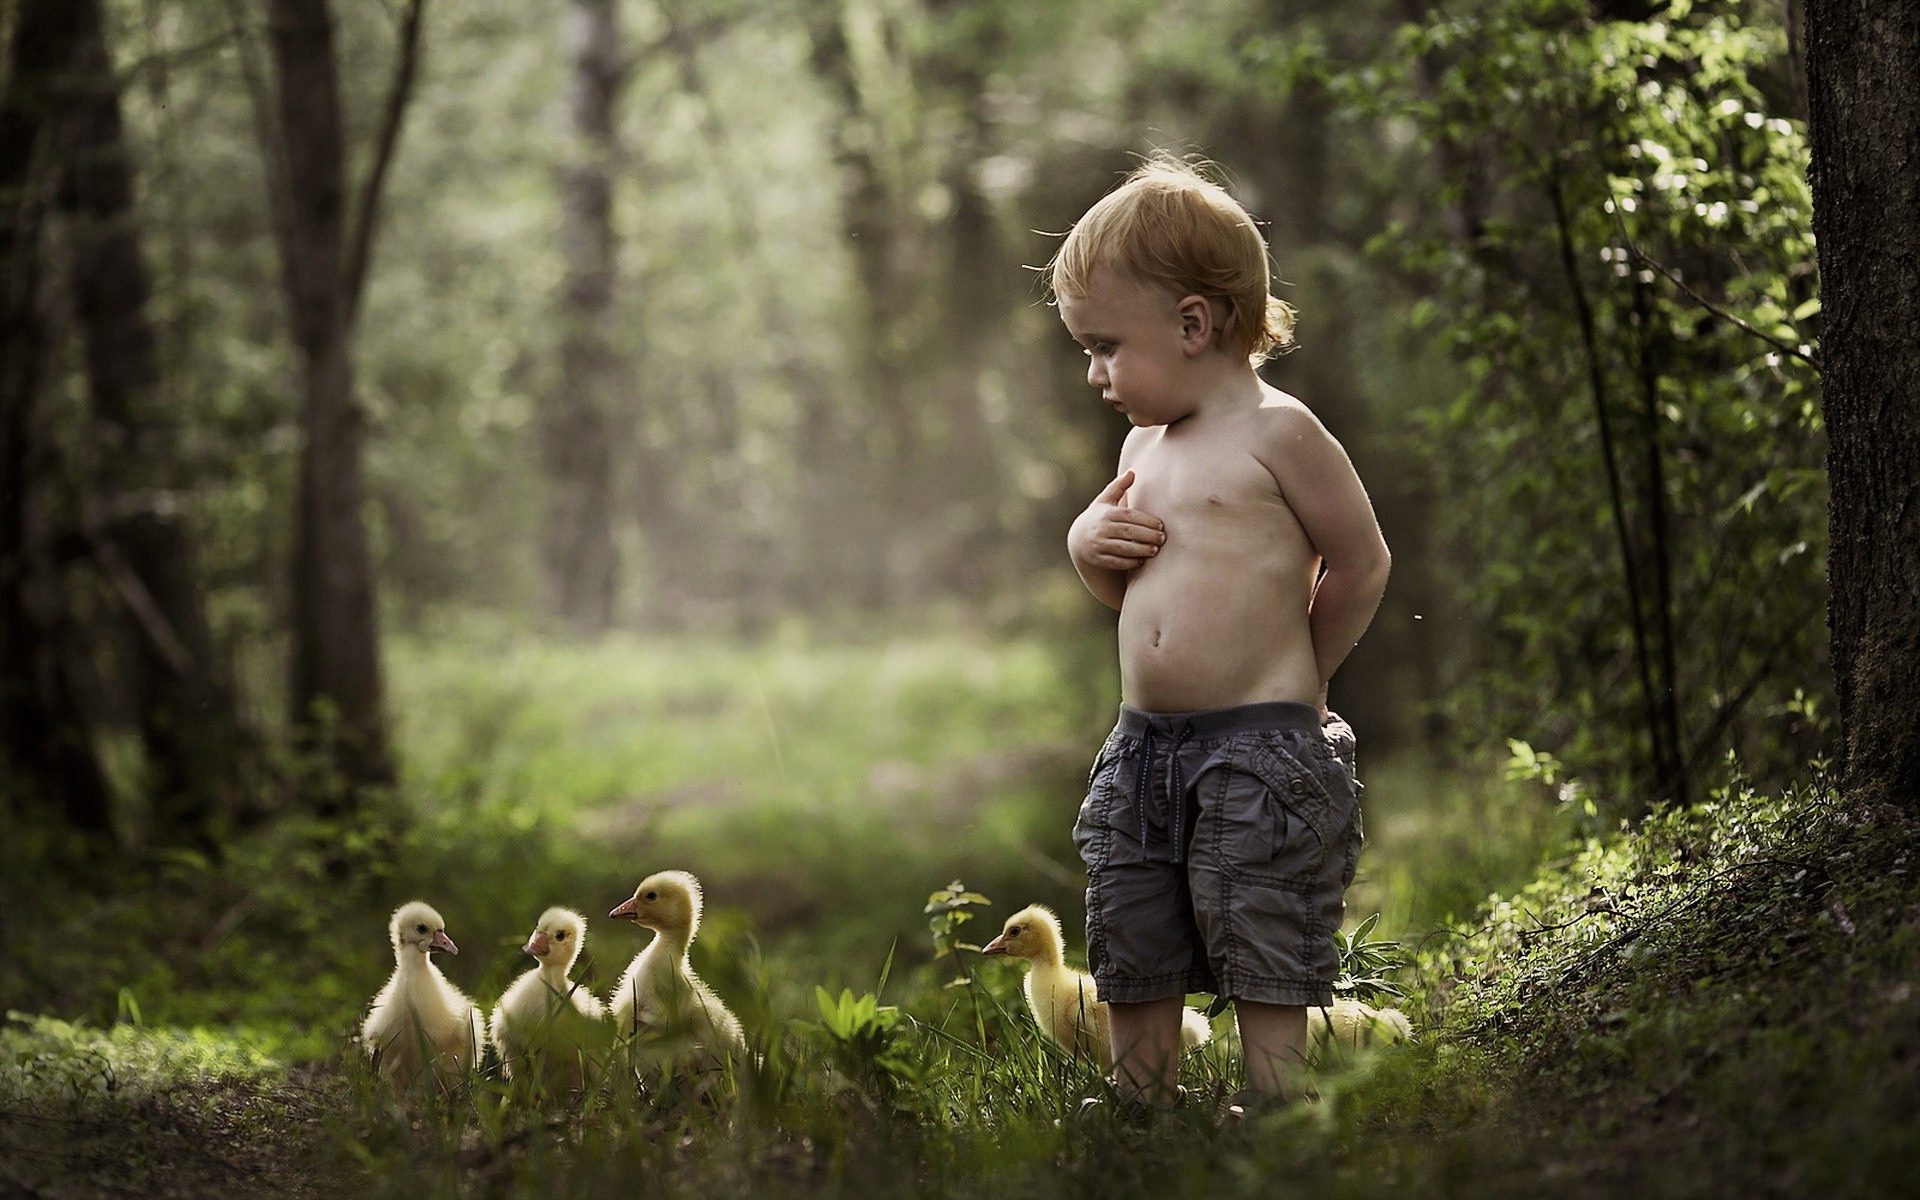 Cute Little Baby Boy With Chicks In Park Hd Images - Photograph - 1920x1200  Wallpaper 